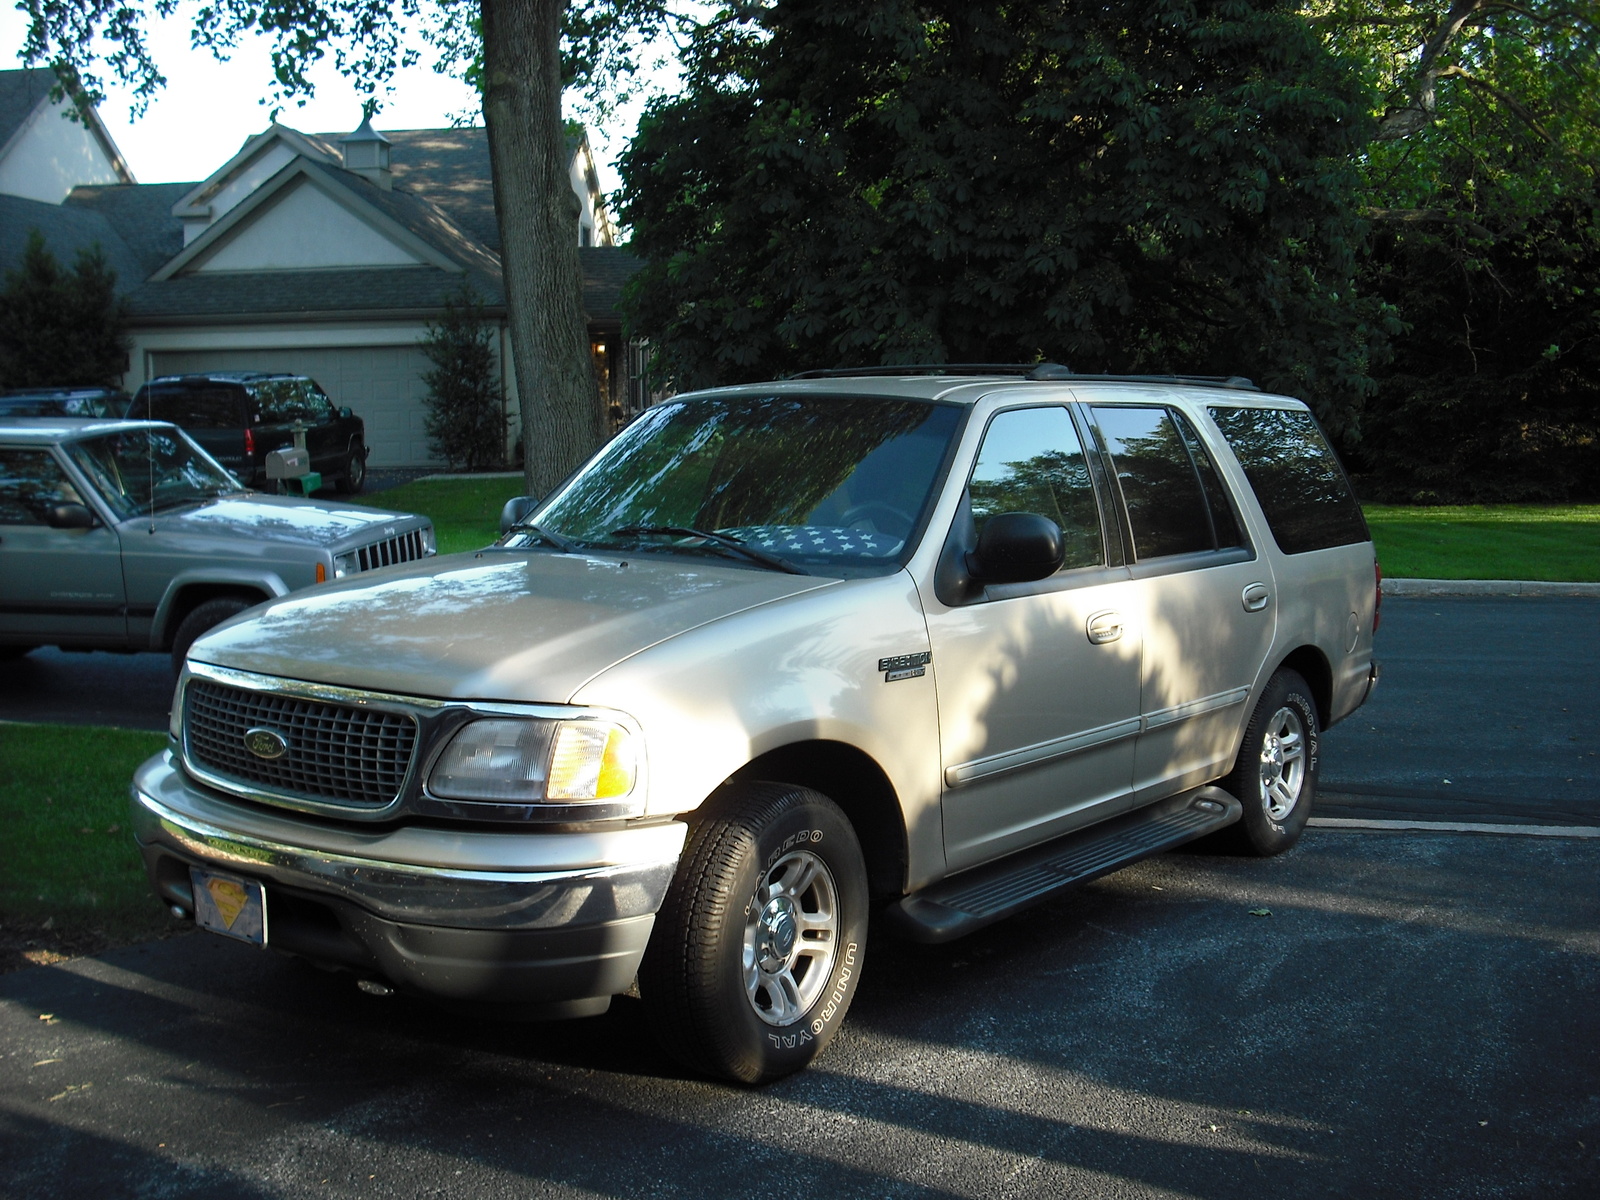 2000 Ford expedition for sale in canada #2